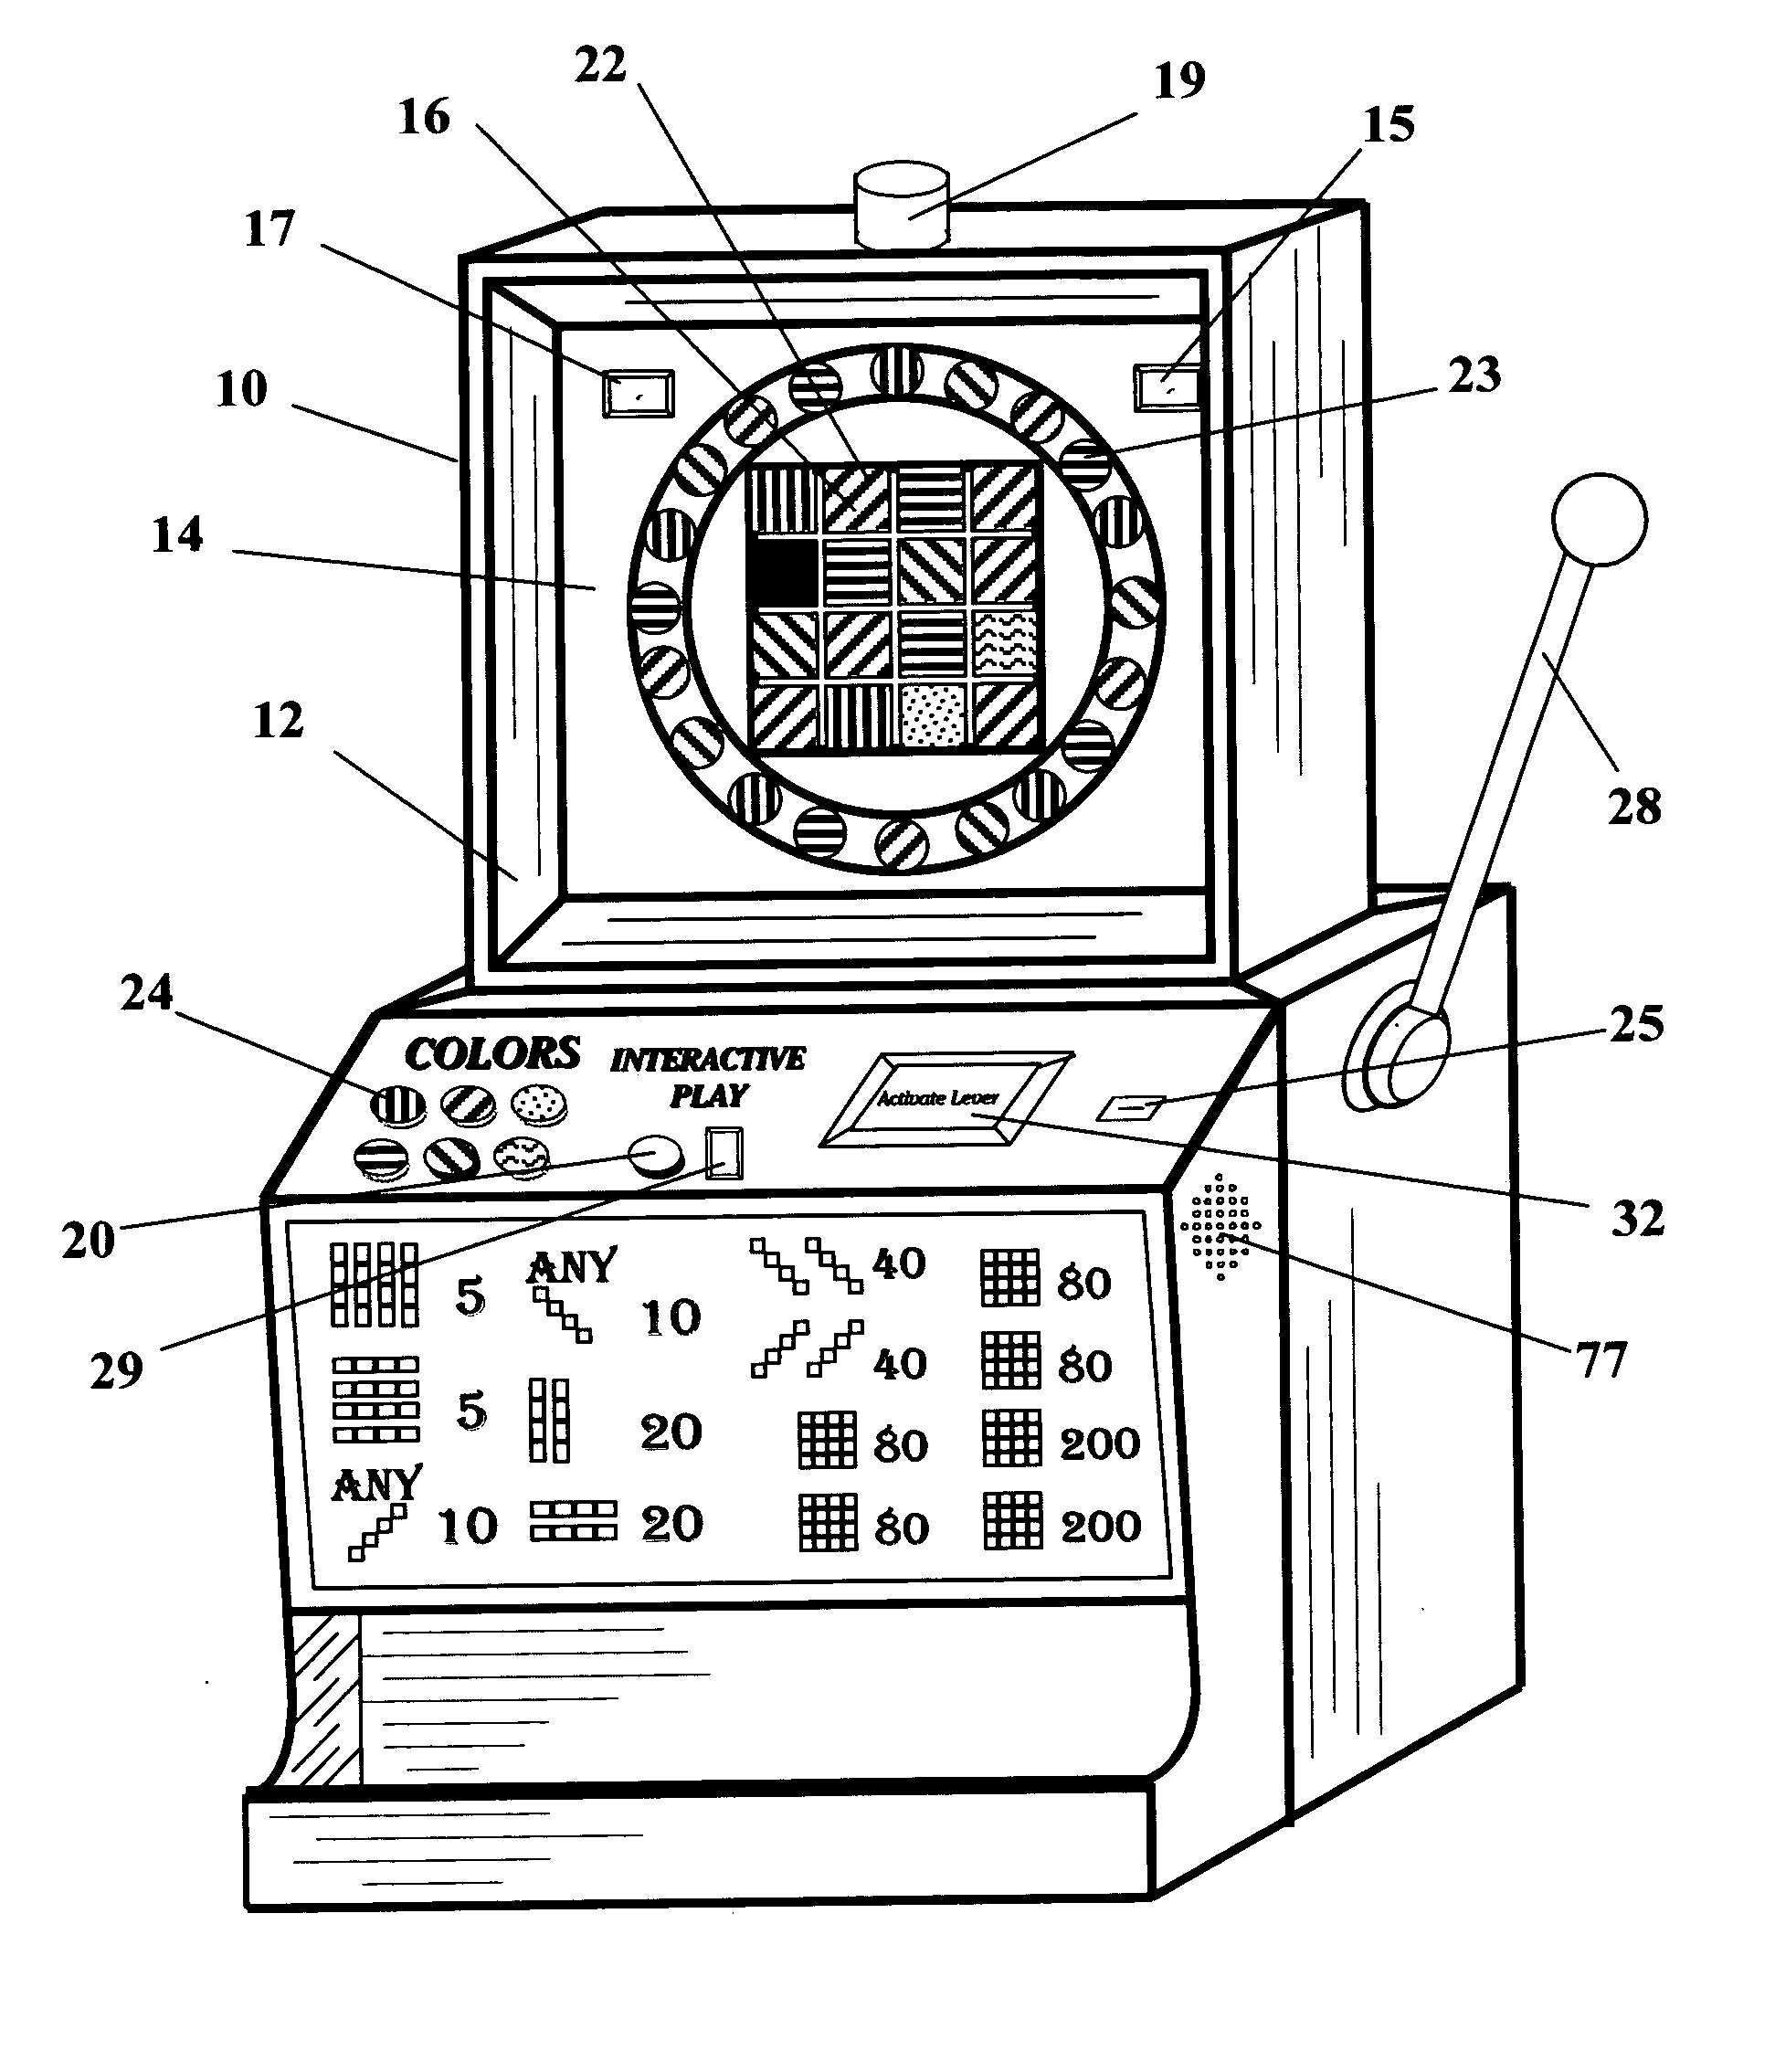 Interactive gaming device